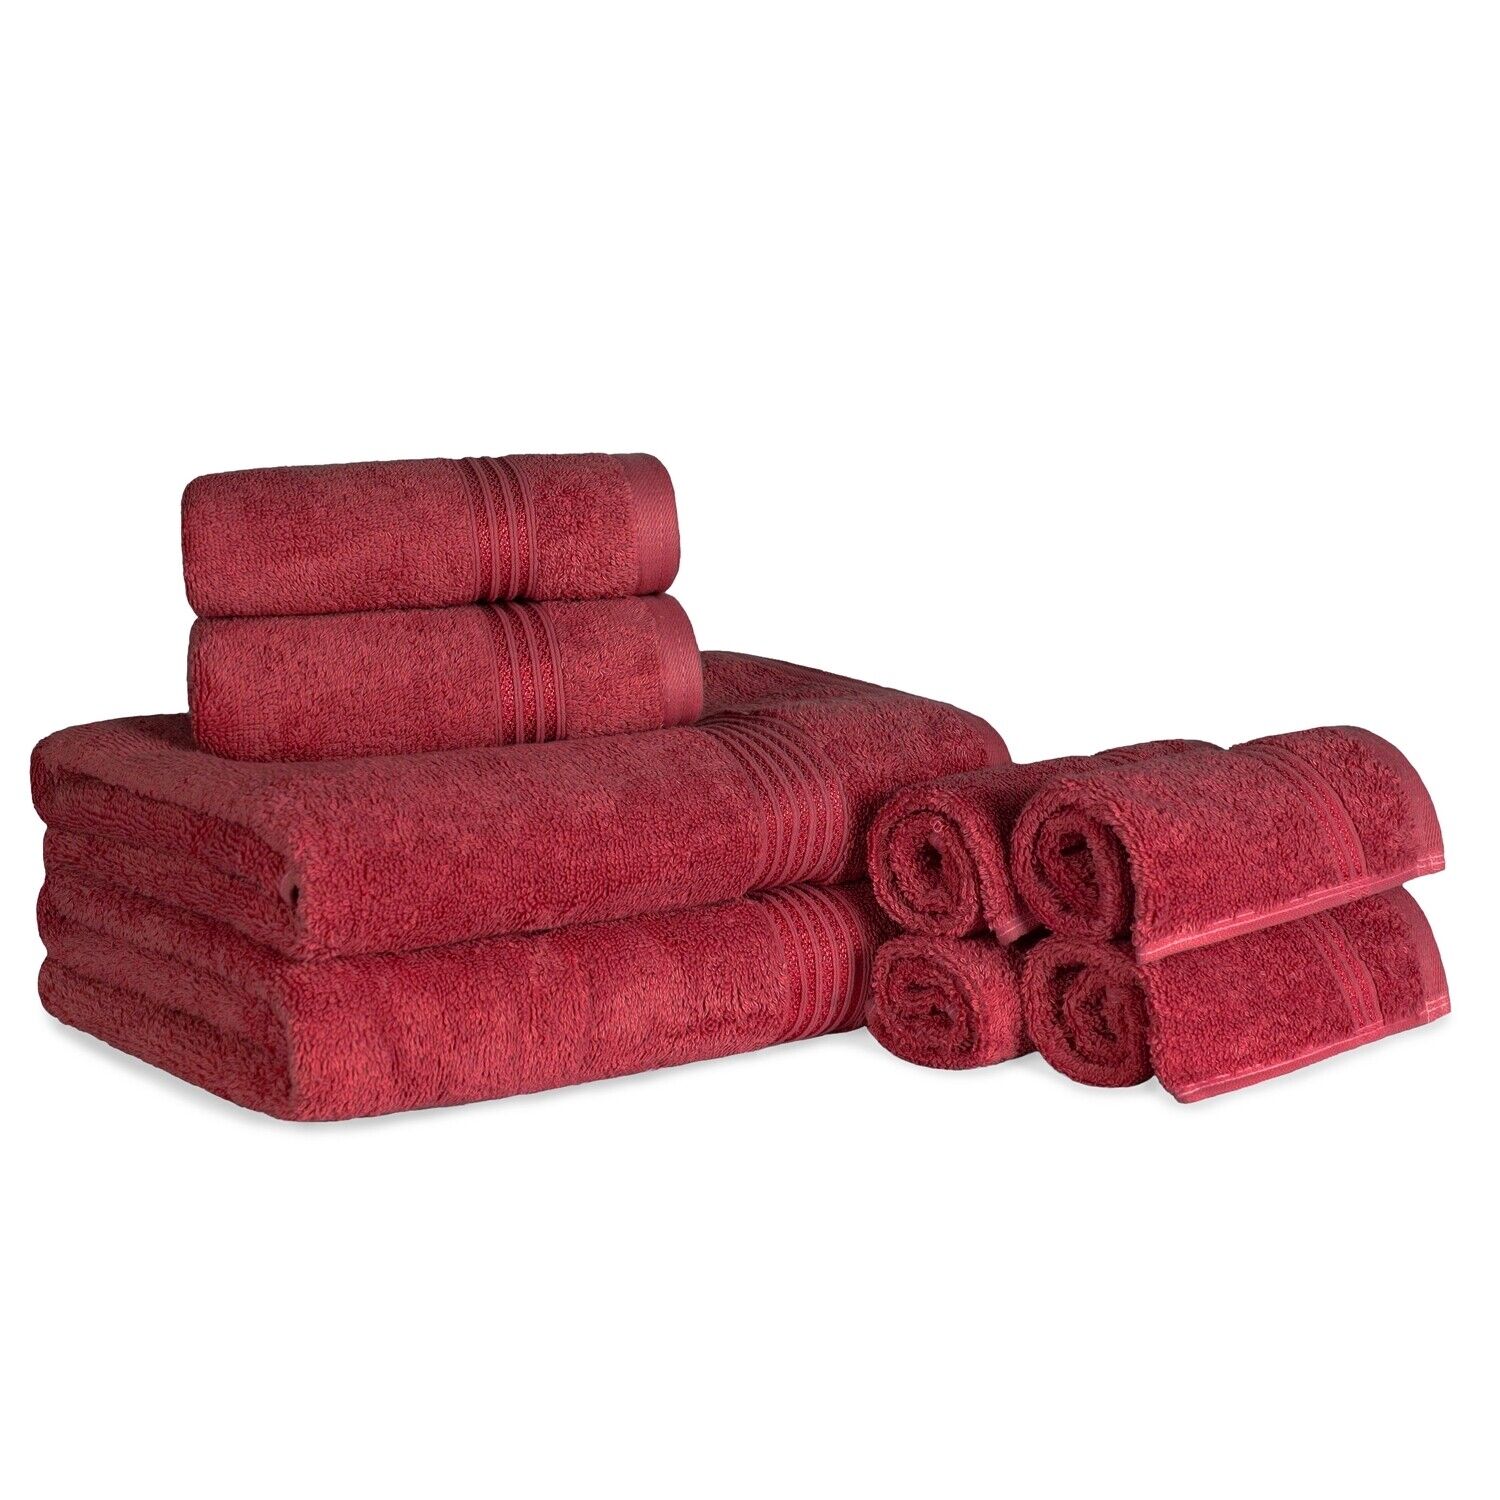 8 Piece Egyptian Cotton Towel Set Hight Absorbent Quick Drying Assorted Towels